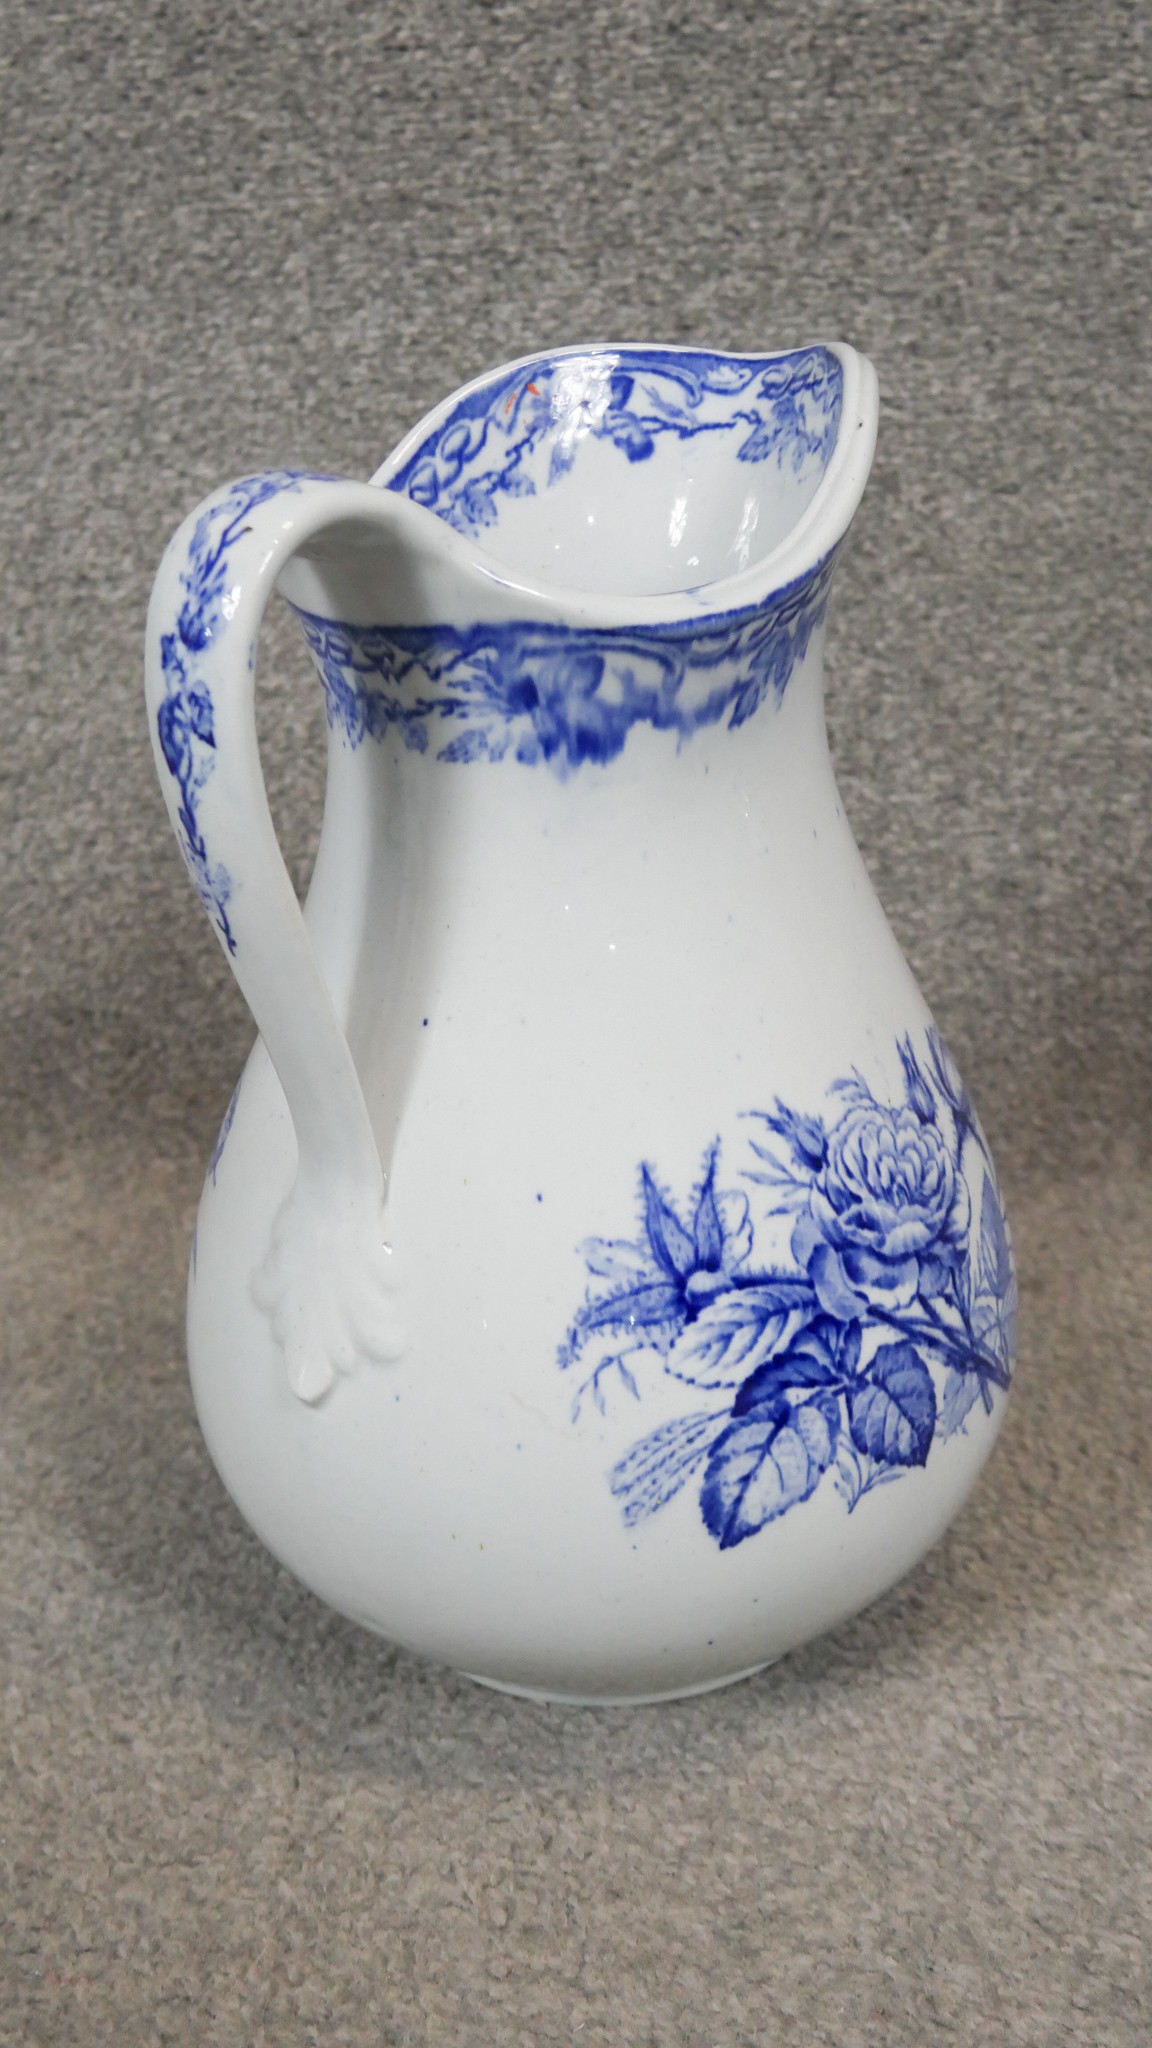 Two Victorian transfer design ceramic wash jugs. One with an Oriental fan design and one with roses. - Image 3 of 7